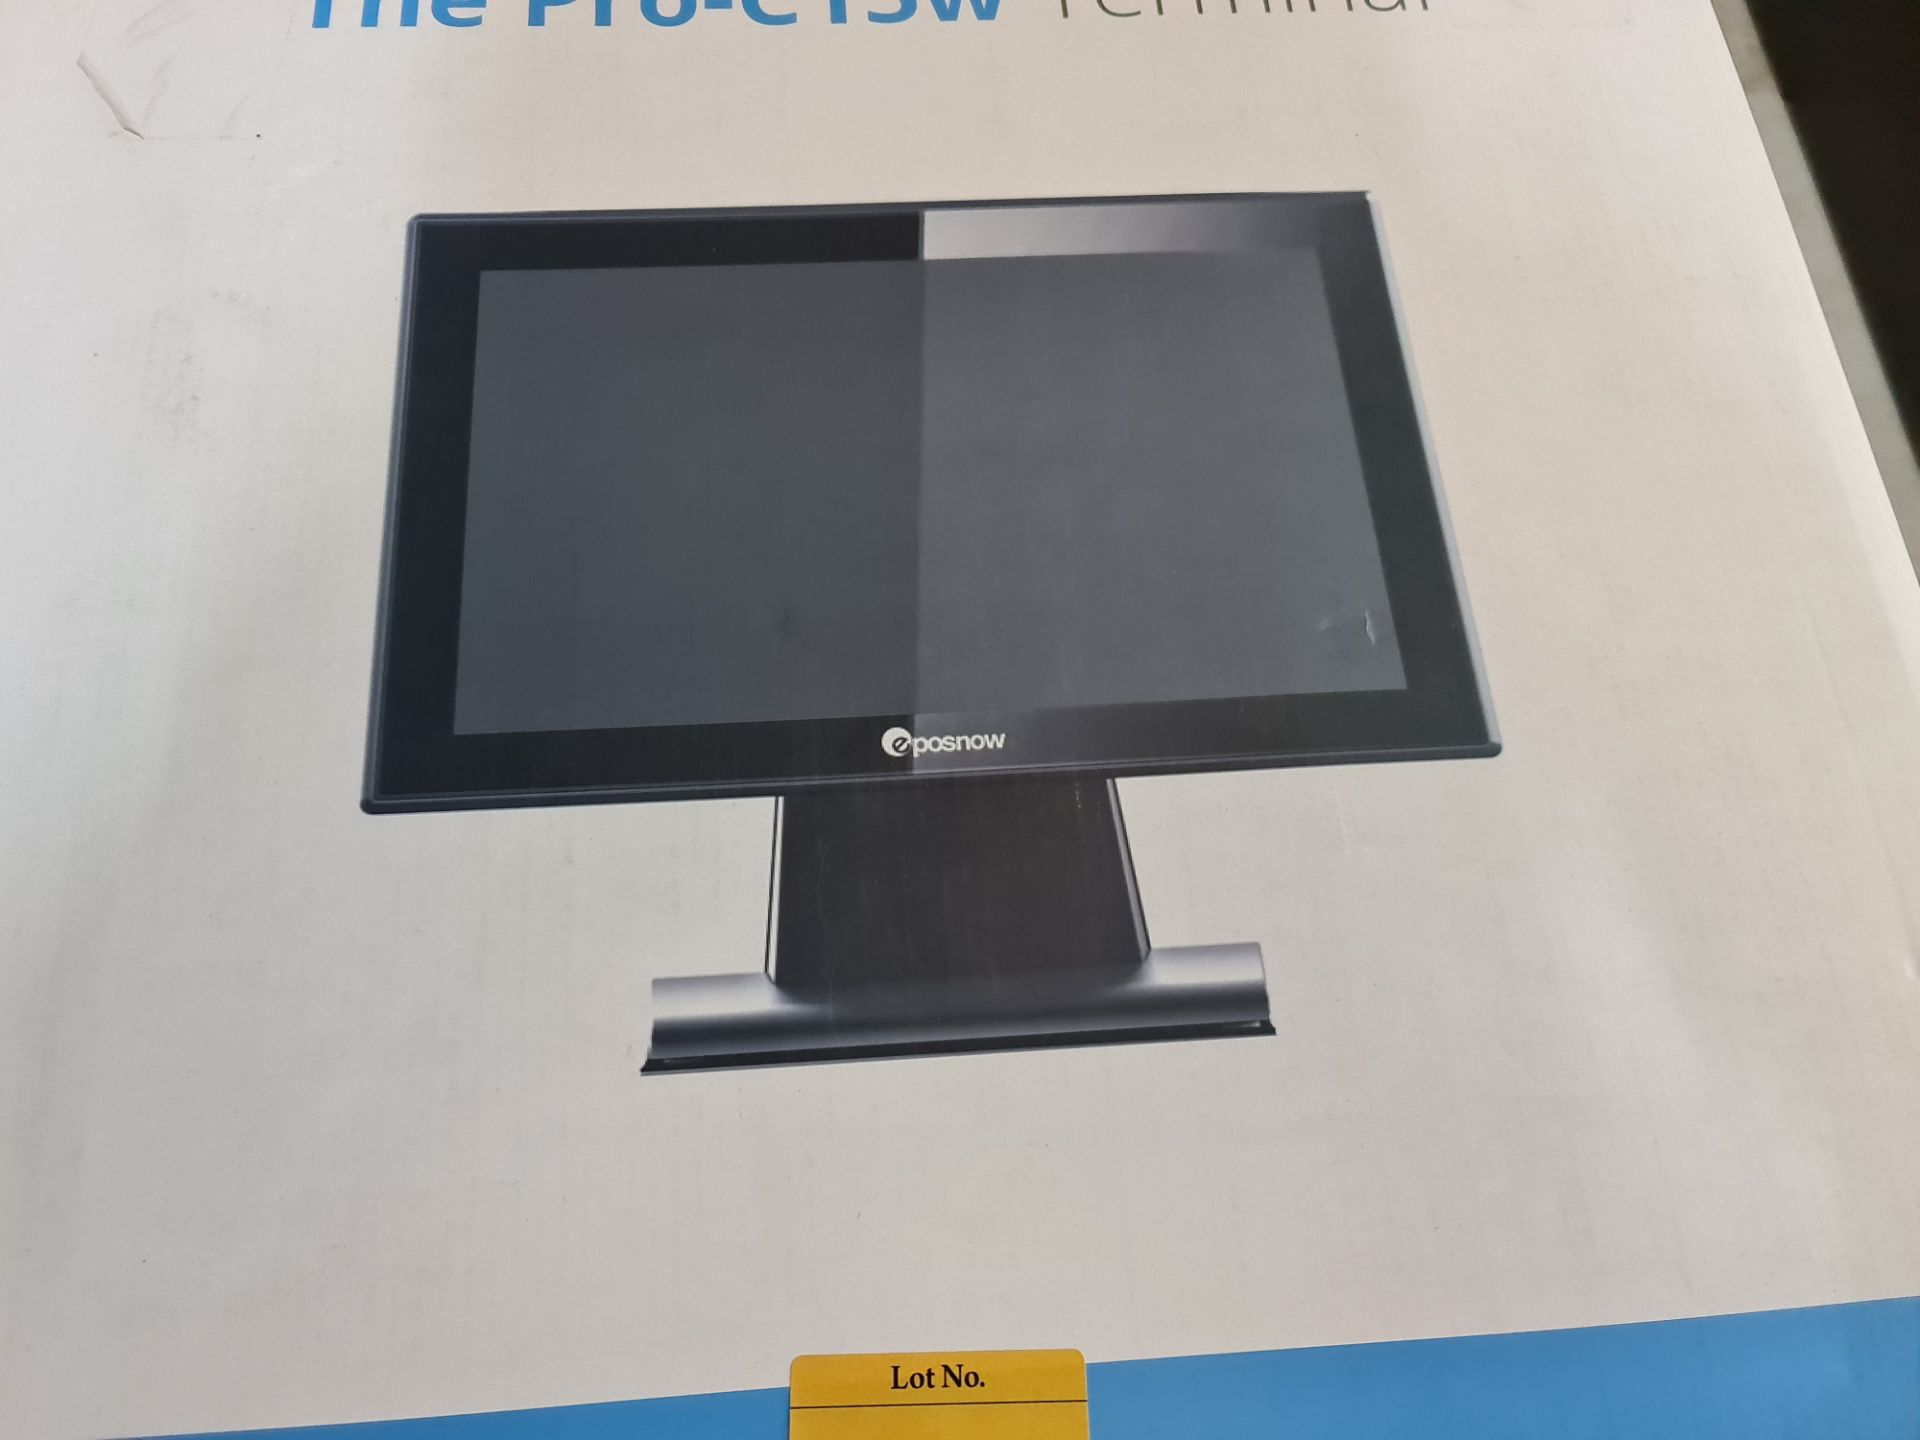 Eposnow model Pro-C15W EPOS terminal - includes box but we are uncertain if this item is new/unused - Image 4 of 4